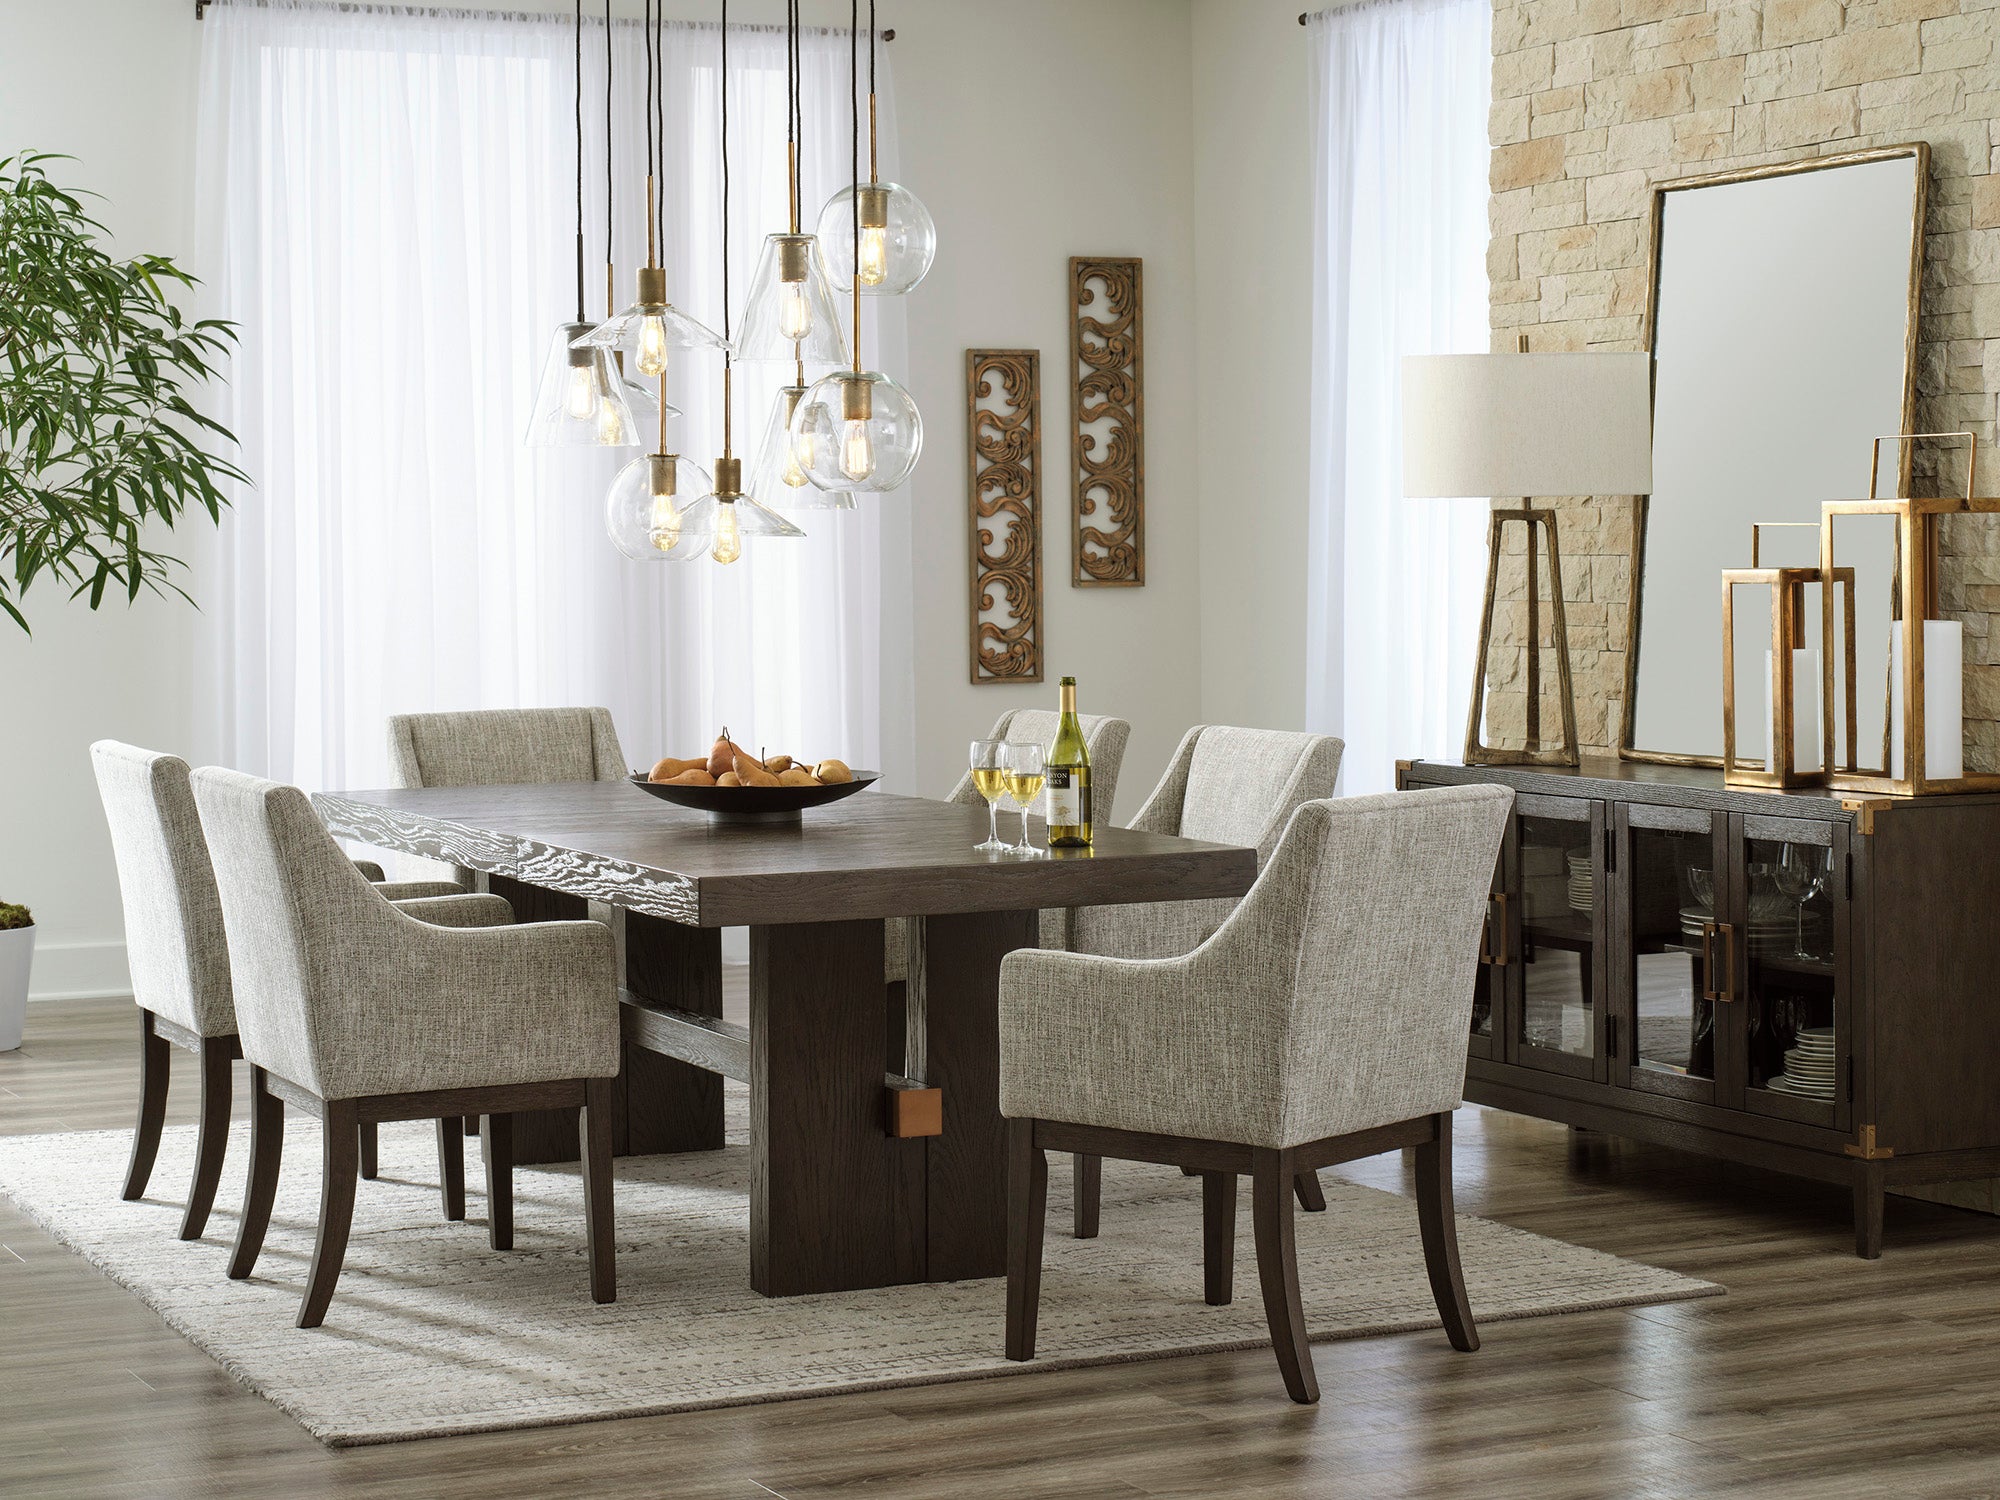 Burkhaus Extendable Dining Table and 6 Chairs